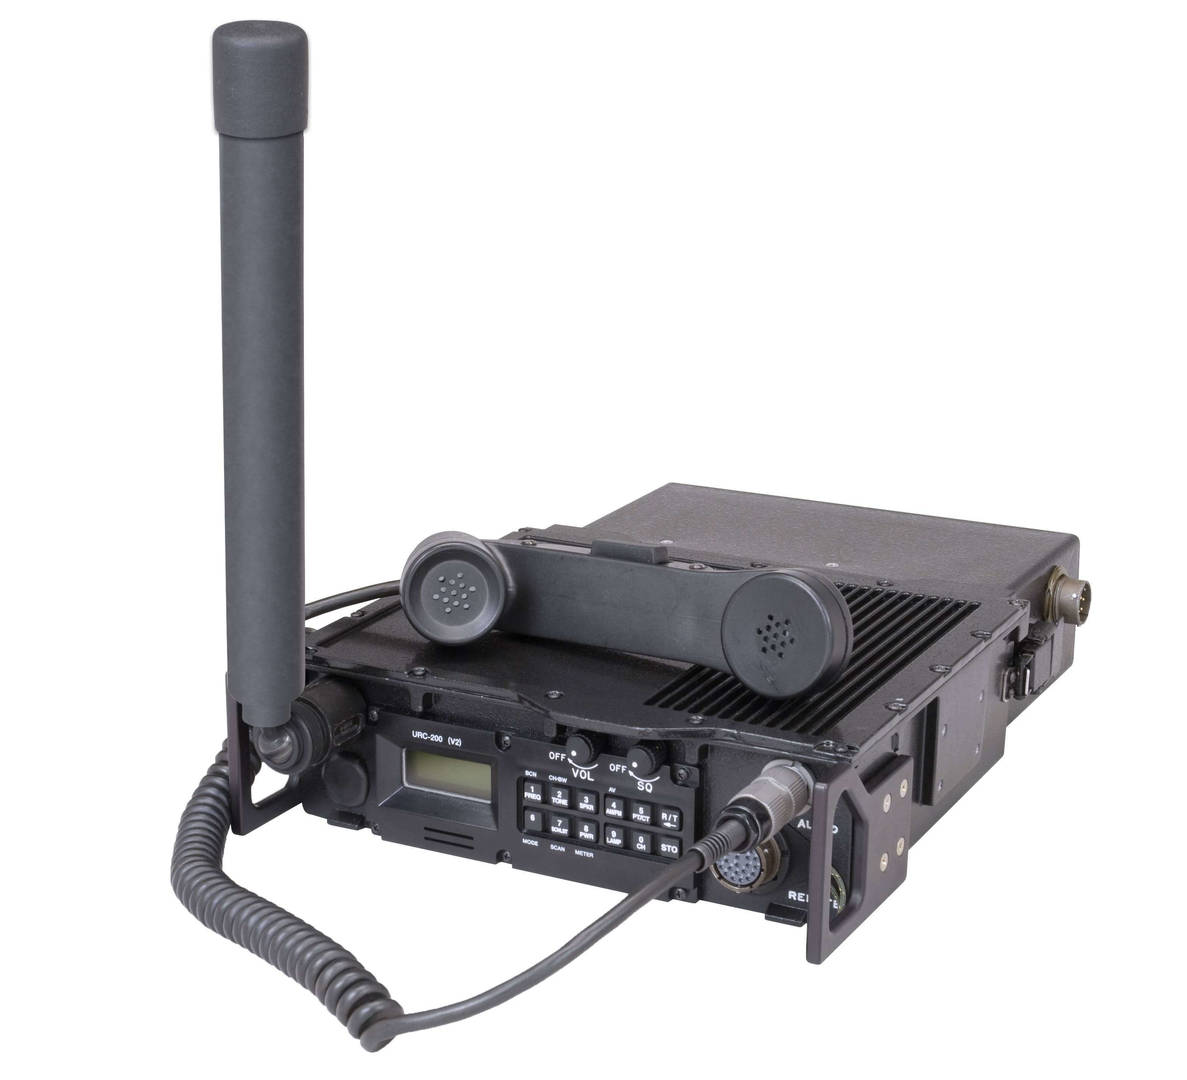 Support d'antenne mobile Ham Radio – First Source Wireless